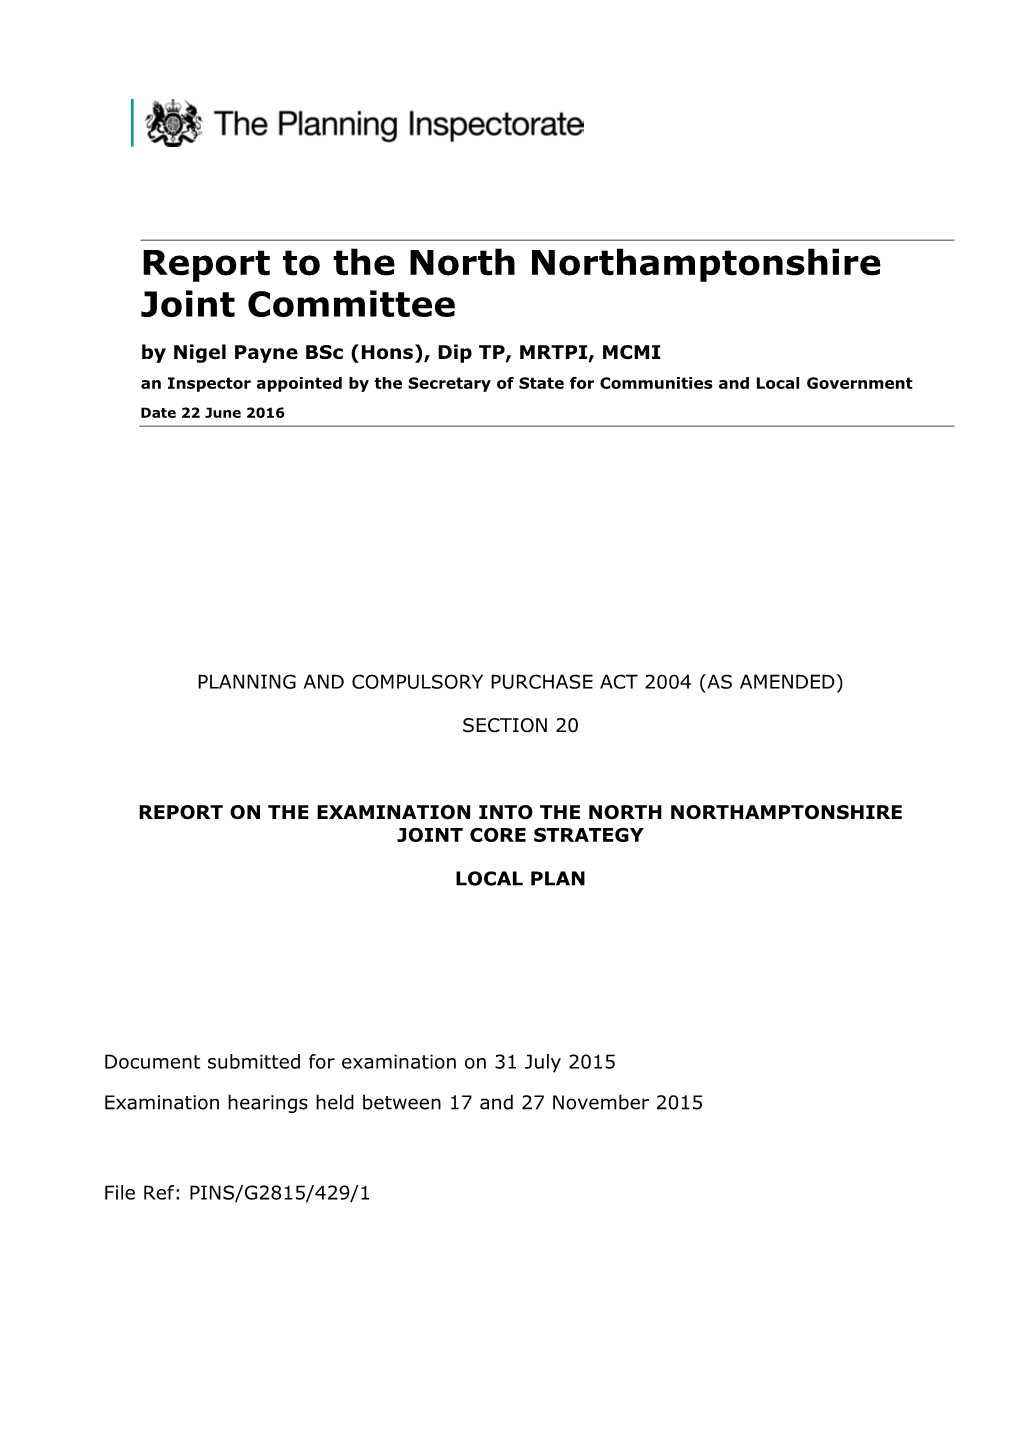 Report to the North Northamptonshire Joint Committee